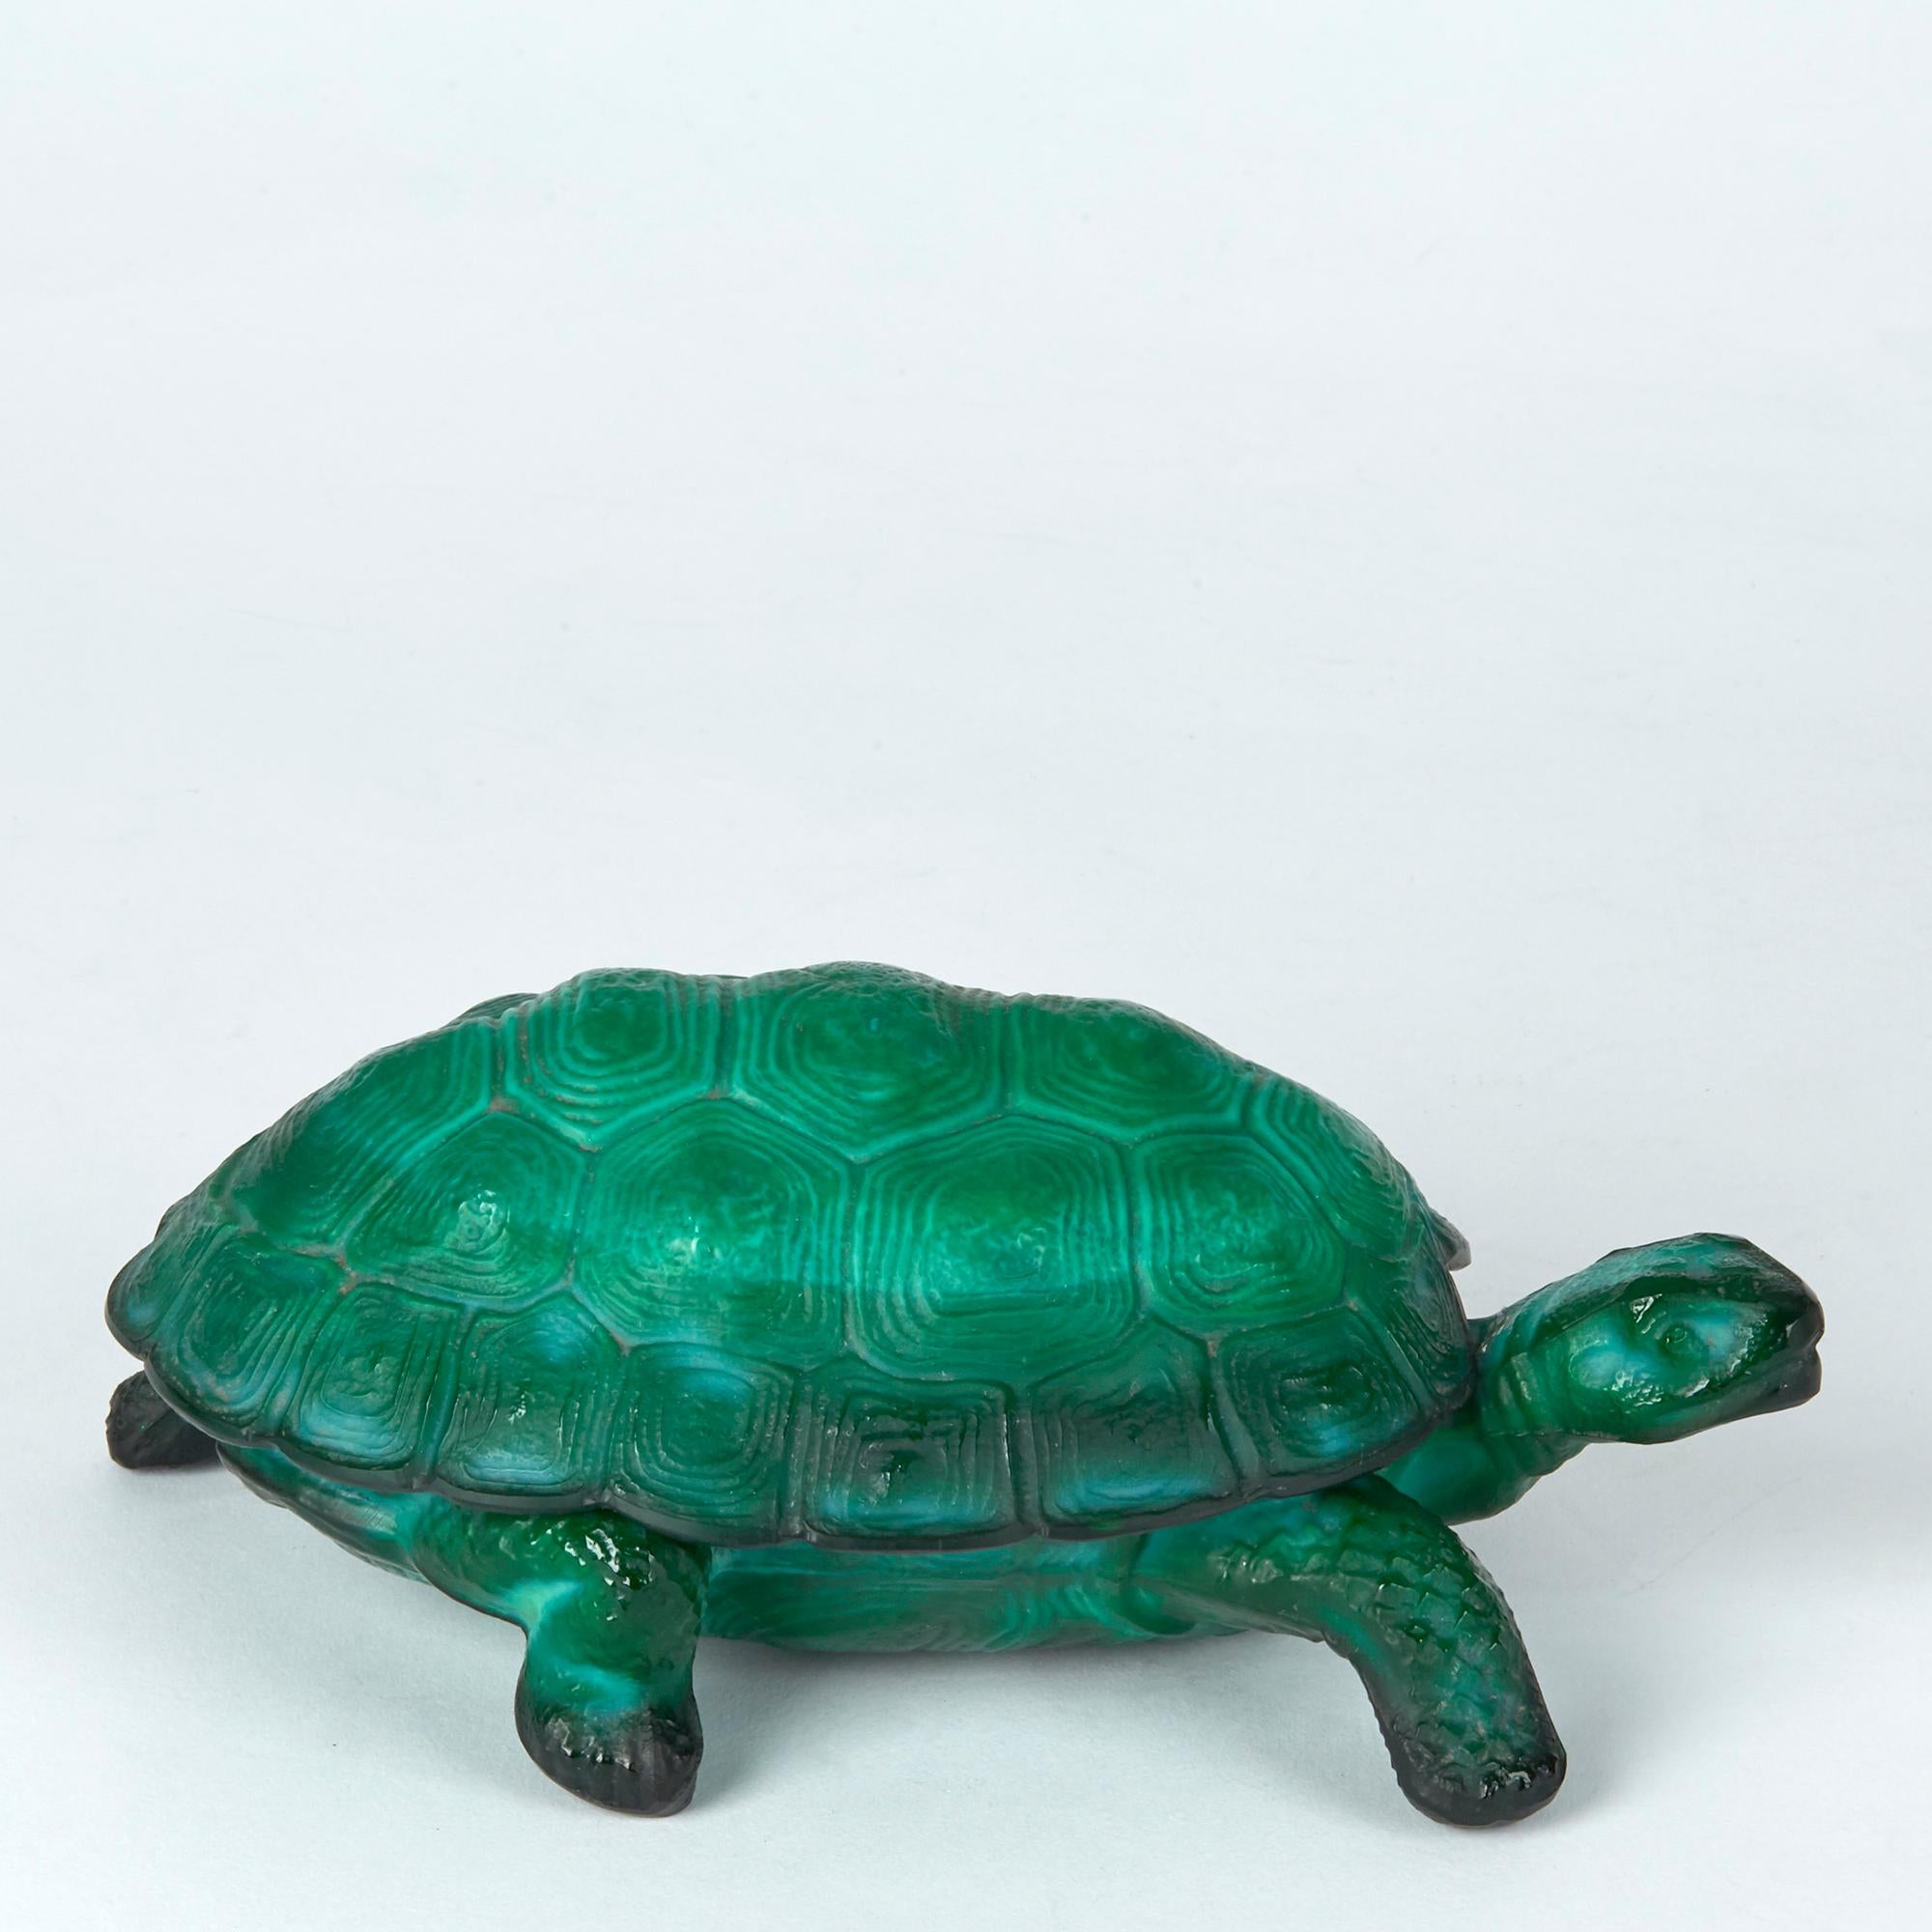 A stunning and rare Art Deco Bohemian Curt Schlevogt malachite green glass tortoise container moulded as a standing tortoise with a lift off fitted shell dating from circa 1930. The tortoise is well detailed with matted textures and is not marked.